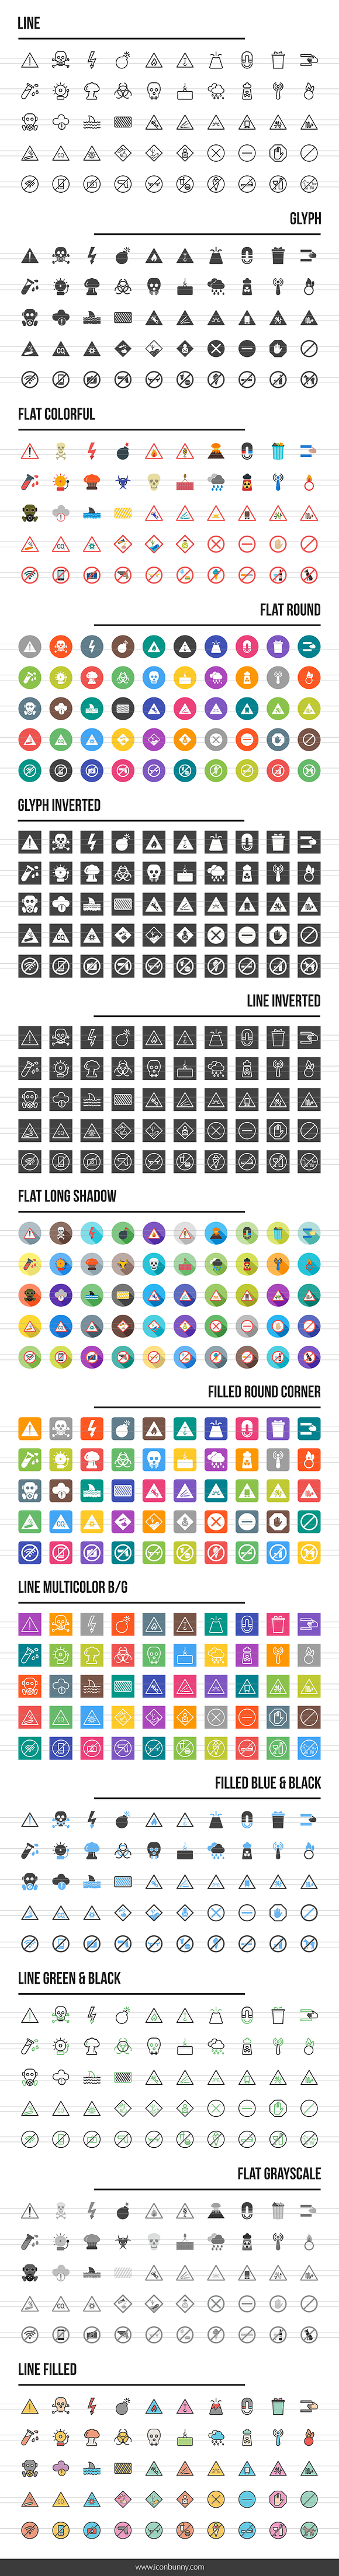 650 Warning & Caution Icons in Graphics - product preview 1